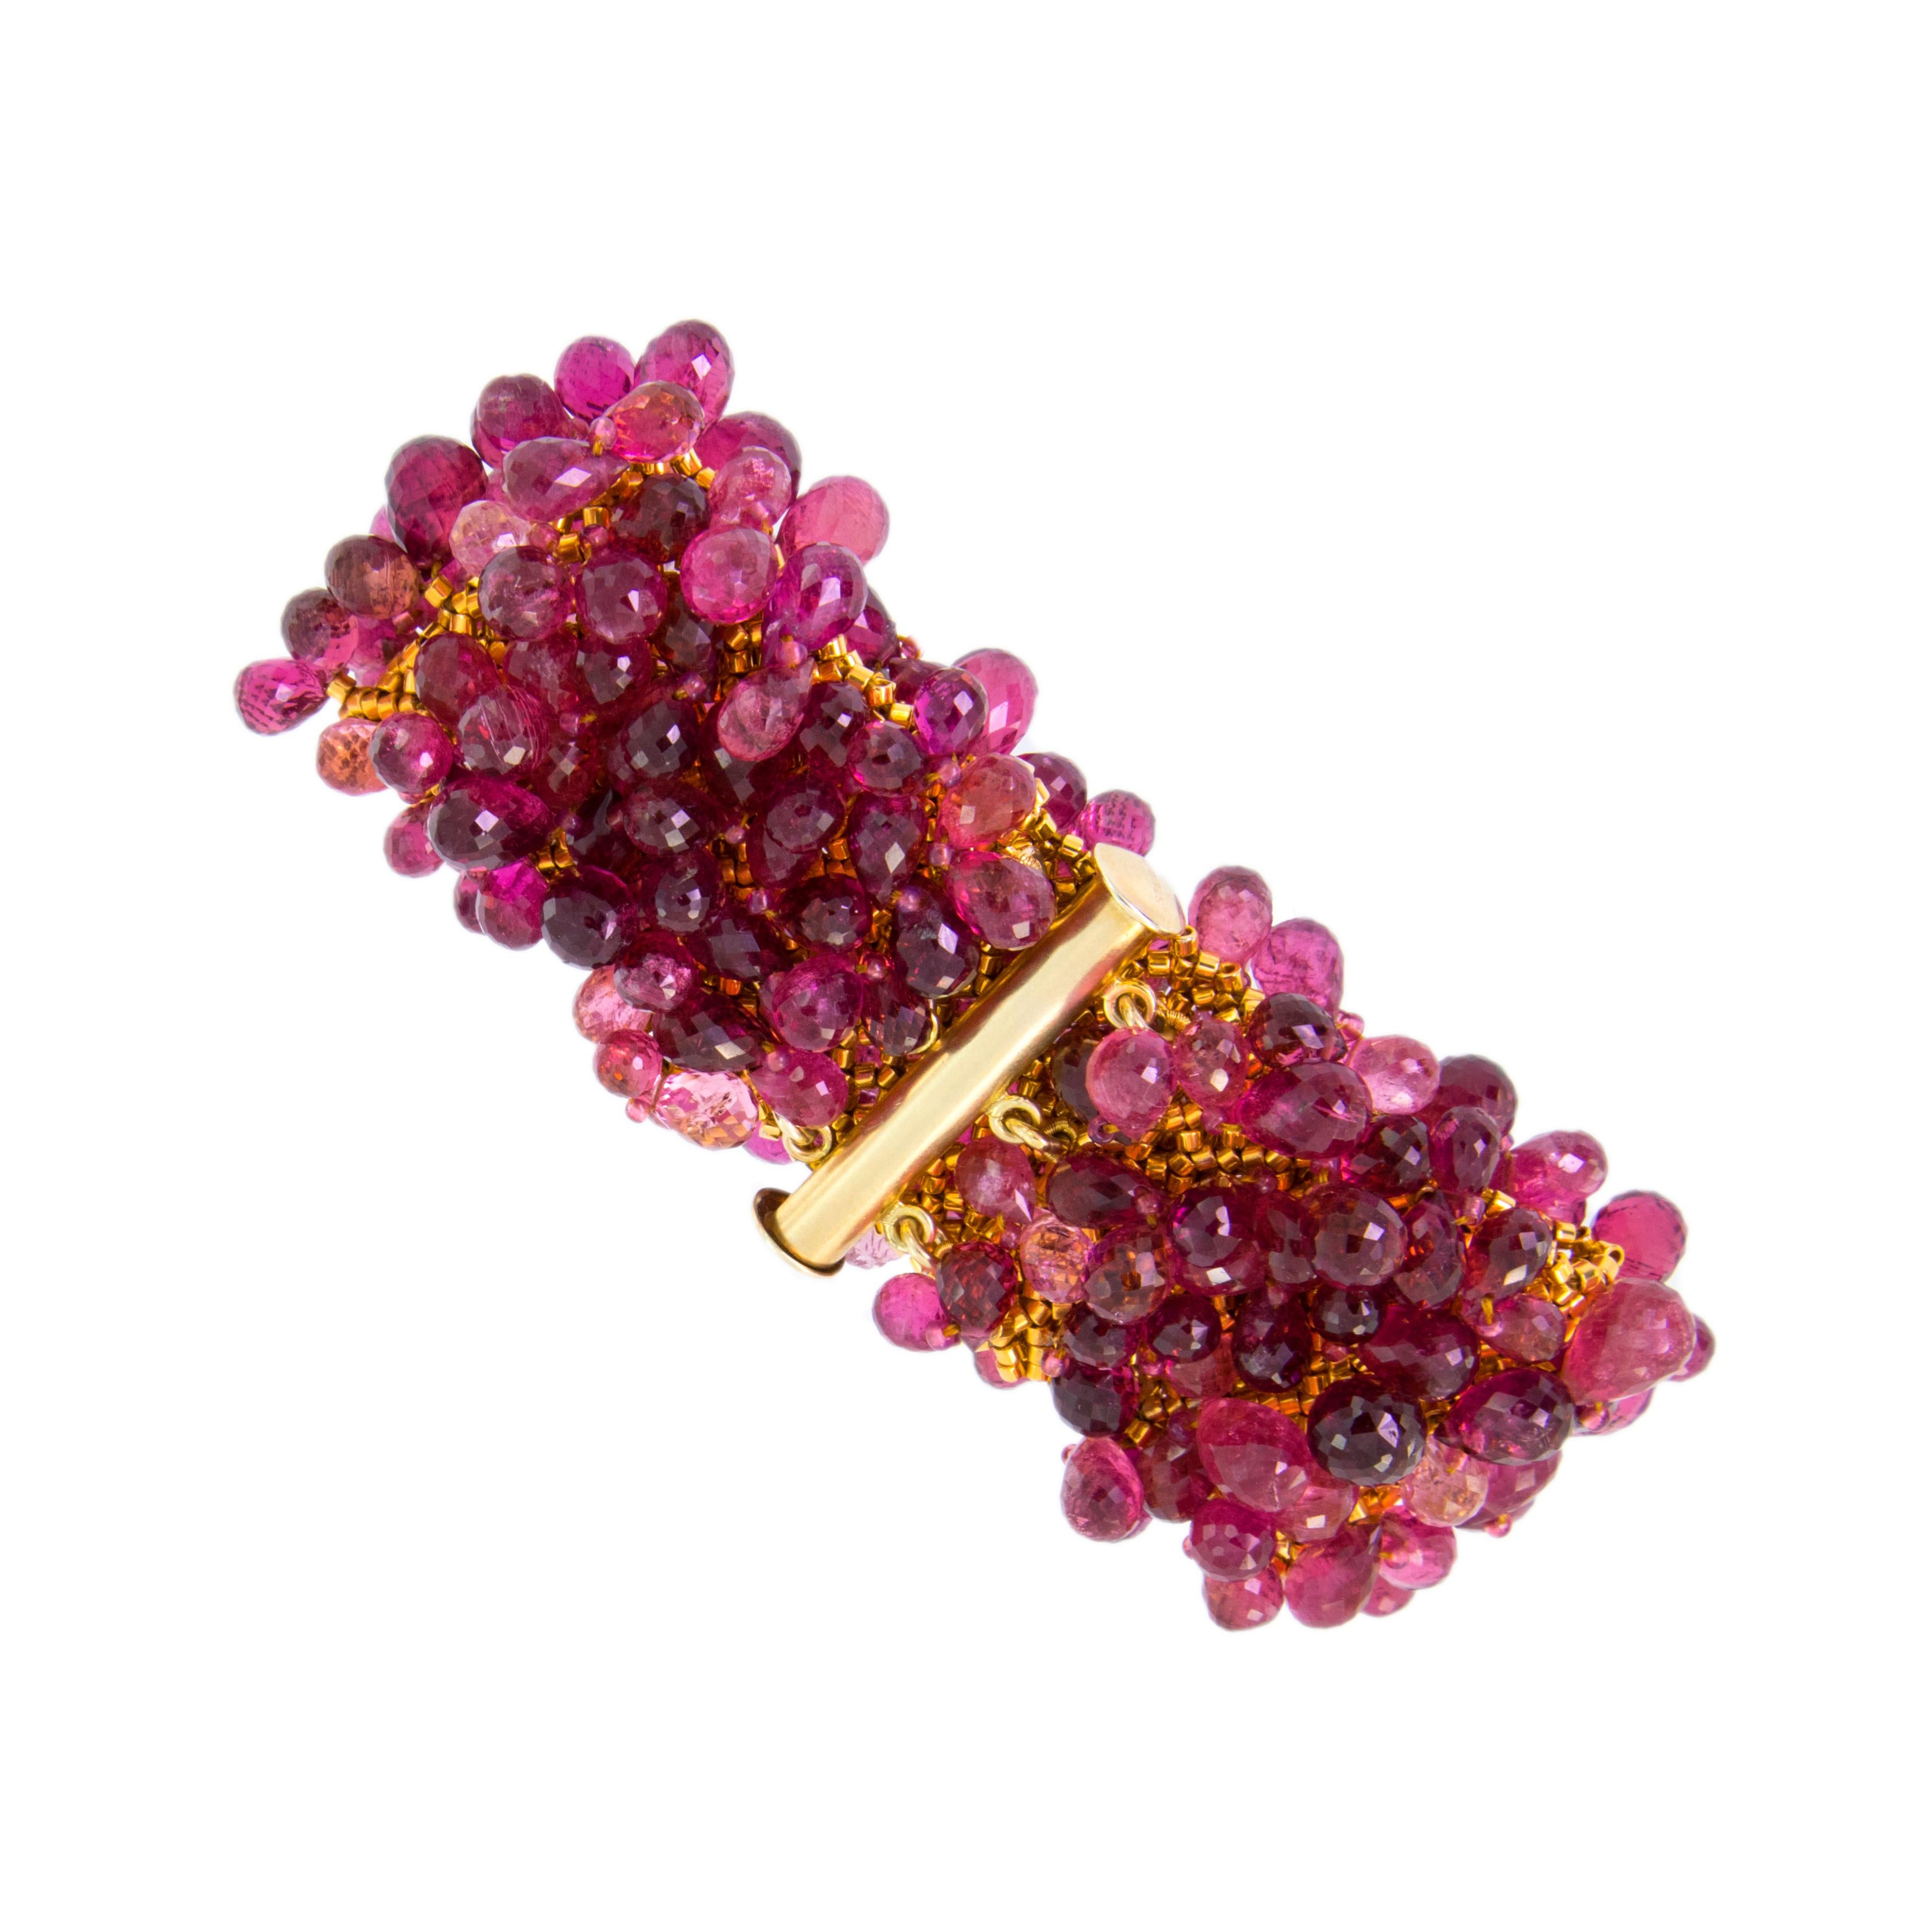 Beautiful hand-woven bracelet with faceted briolette pink tourmaline beads = 327.70 Cttw. with gold plated vermeil clasp.  Designed and handmade by Susan Hoge.